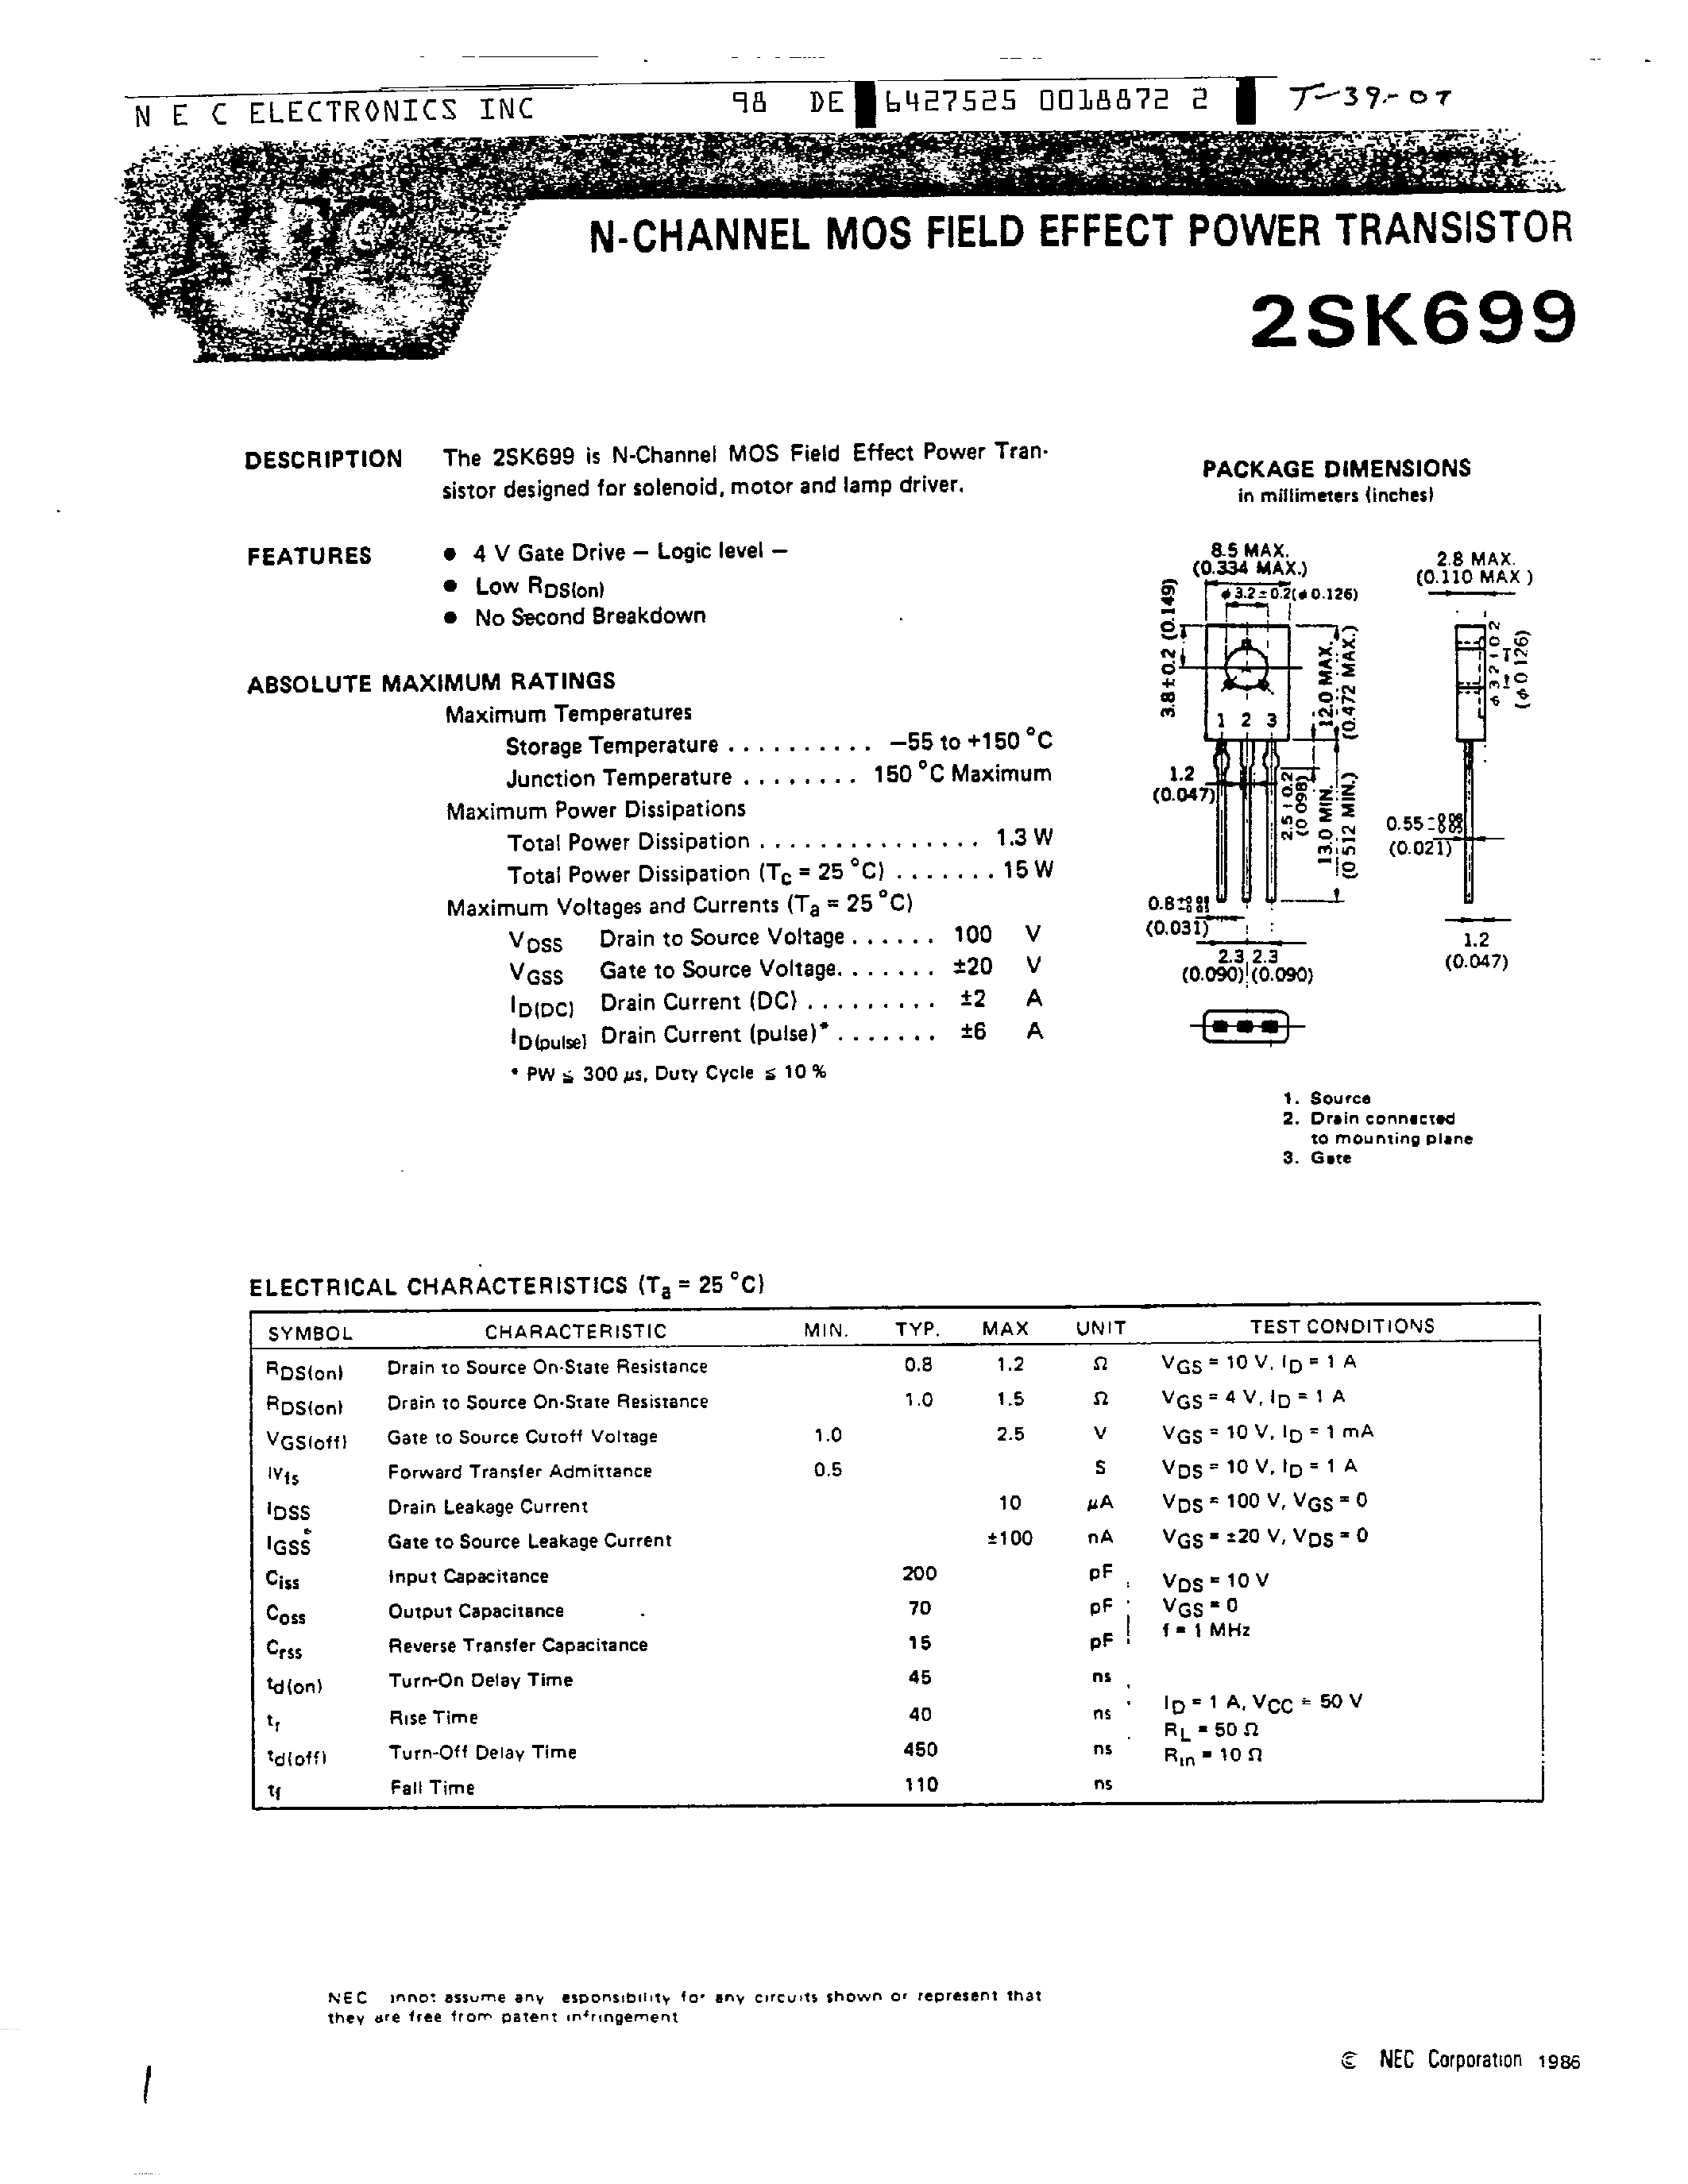 Datasheet K699 - Search -----> 2SK699 page 1